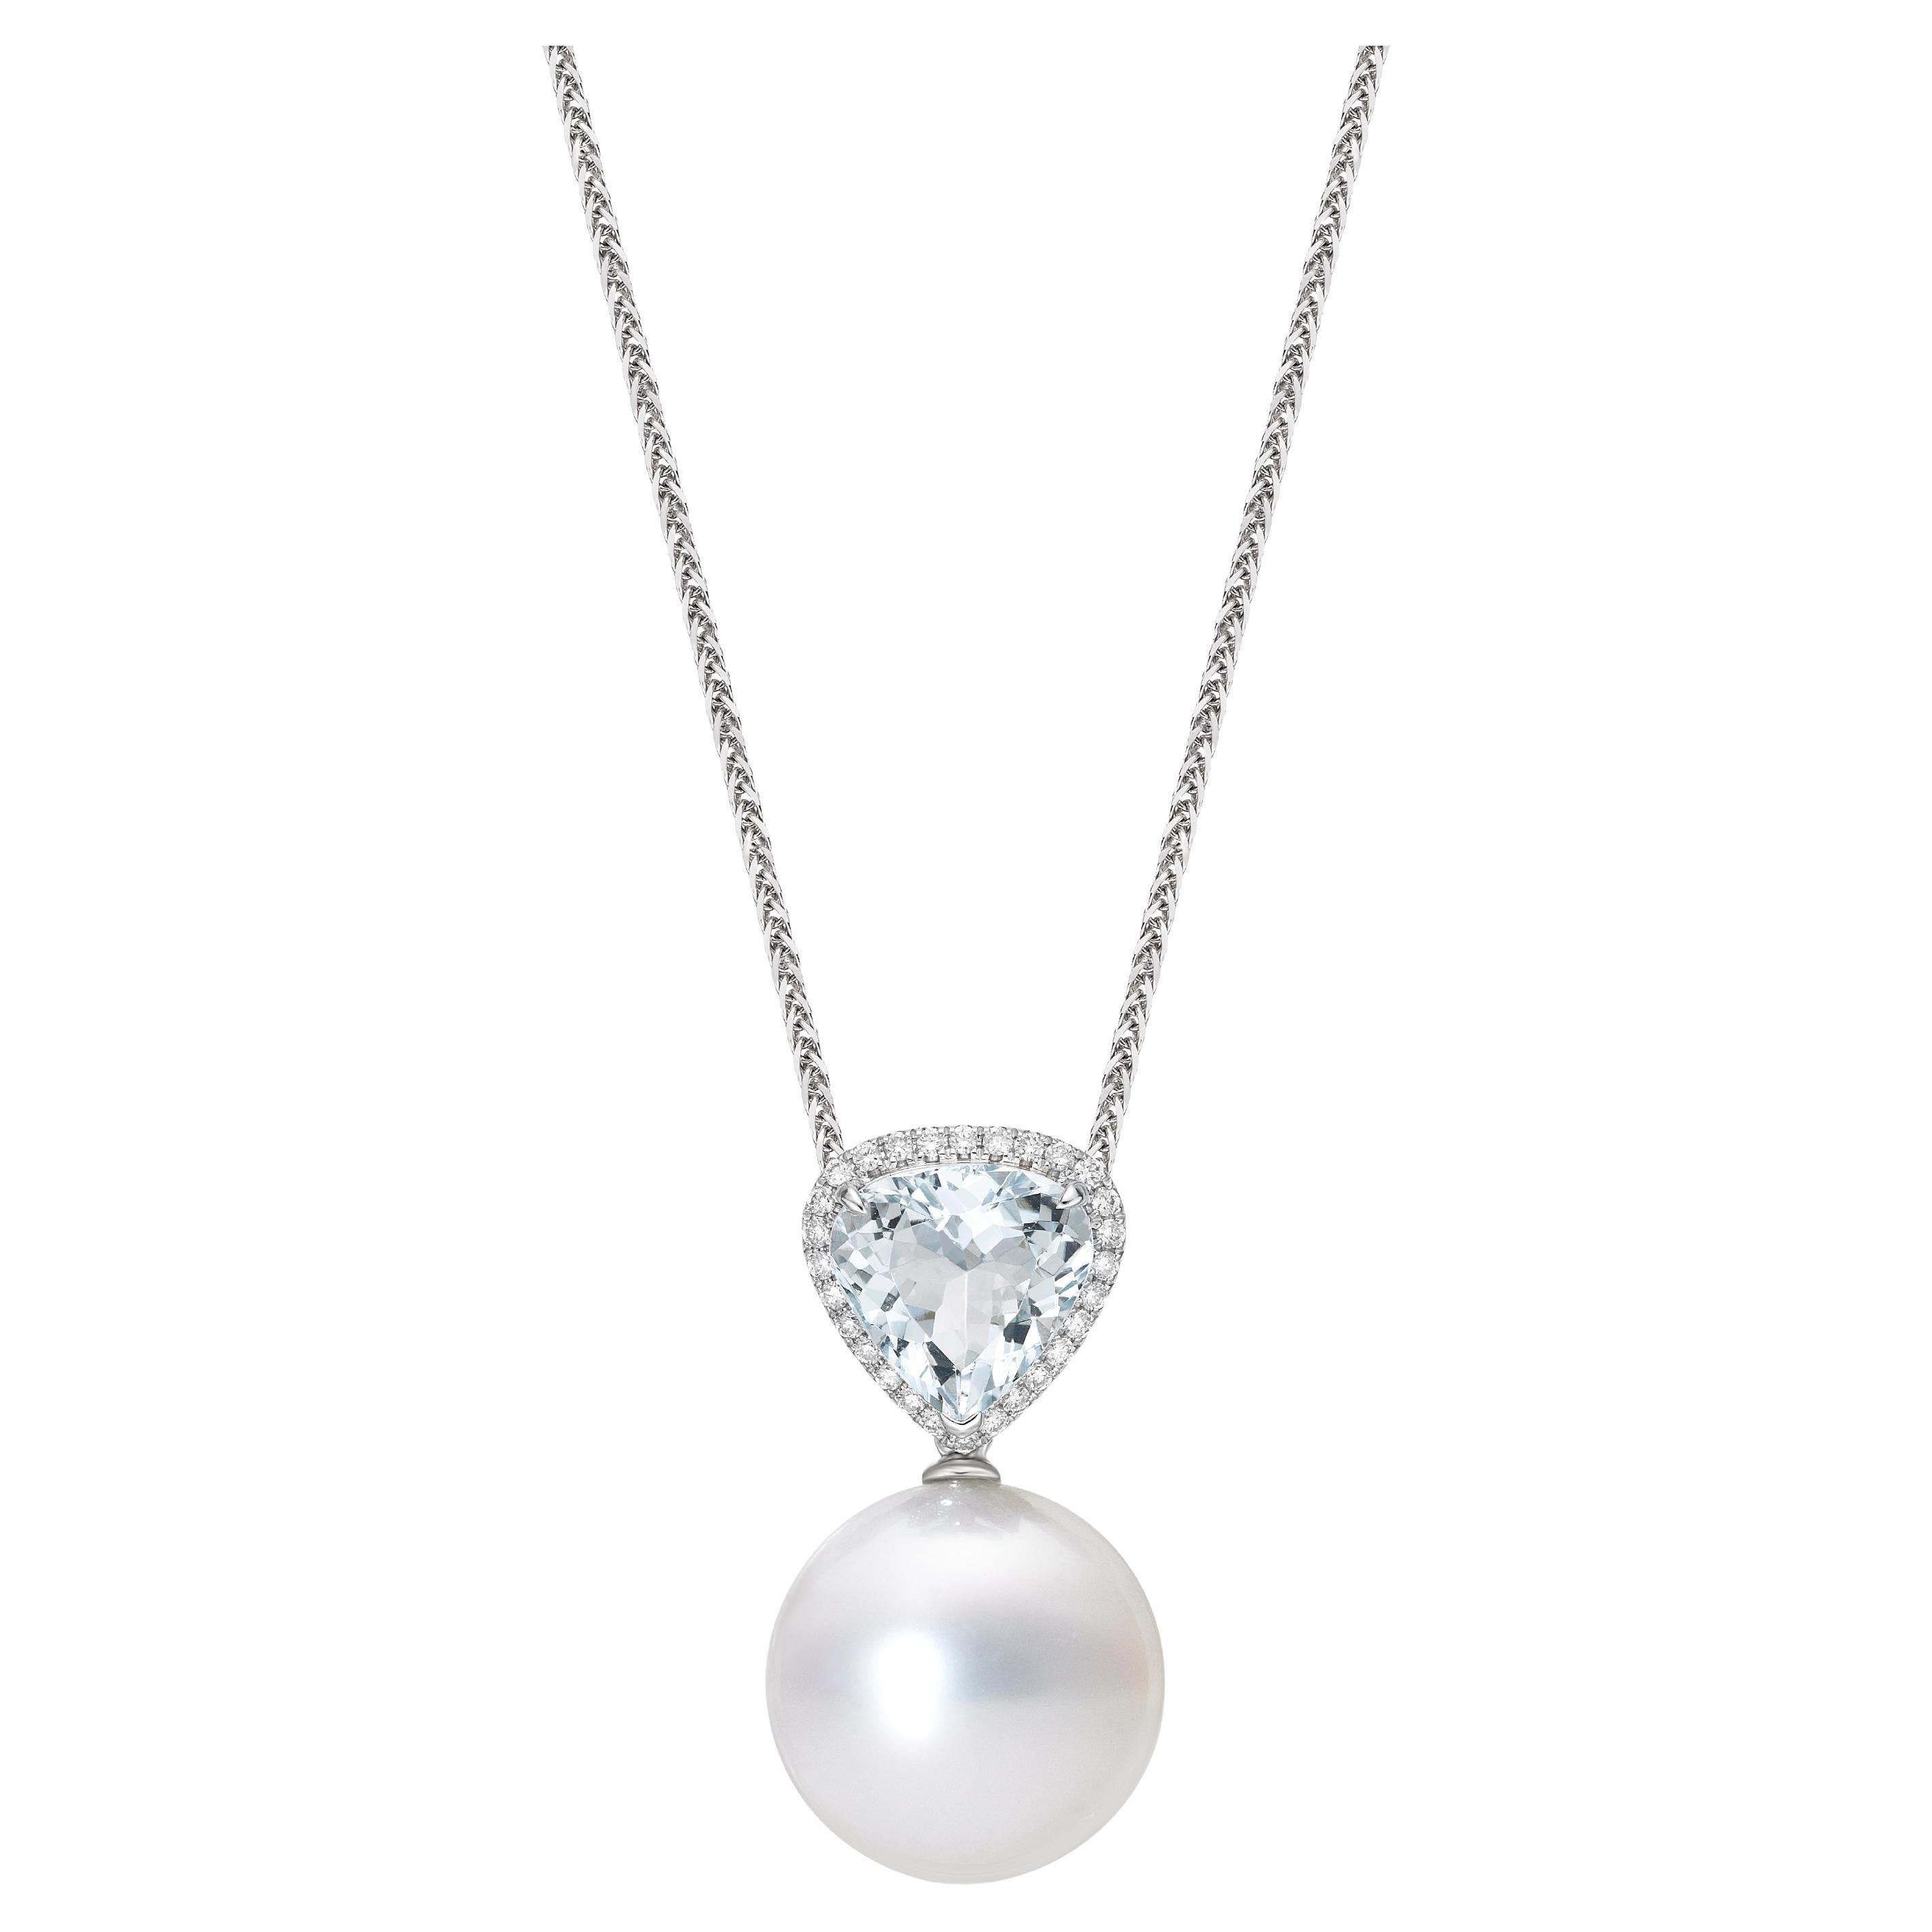 Gilin 18k White Gold Diamond Pendant with Aquamarine and Pearl For Sale